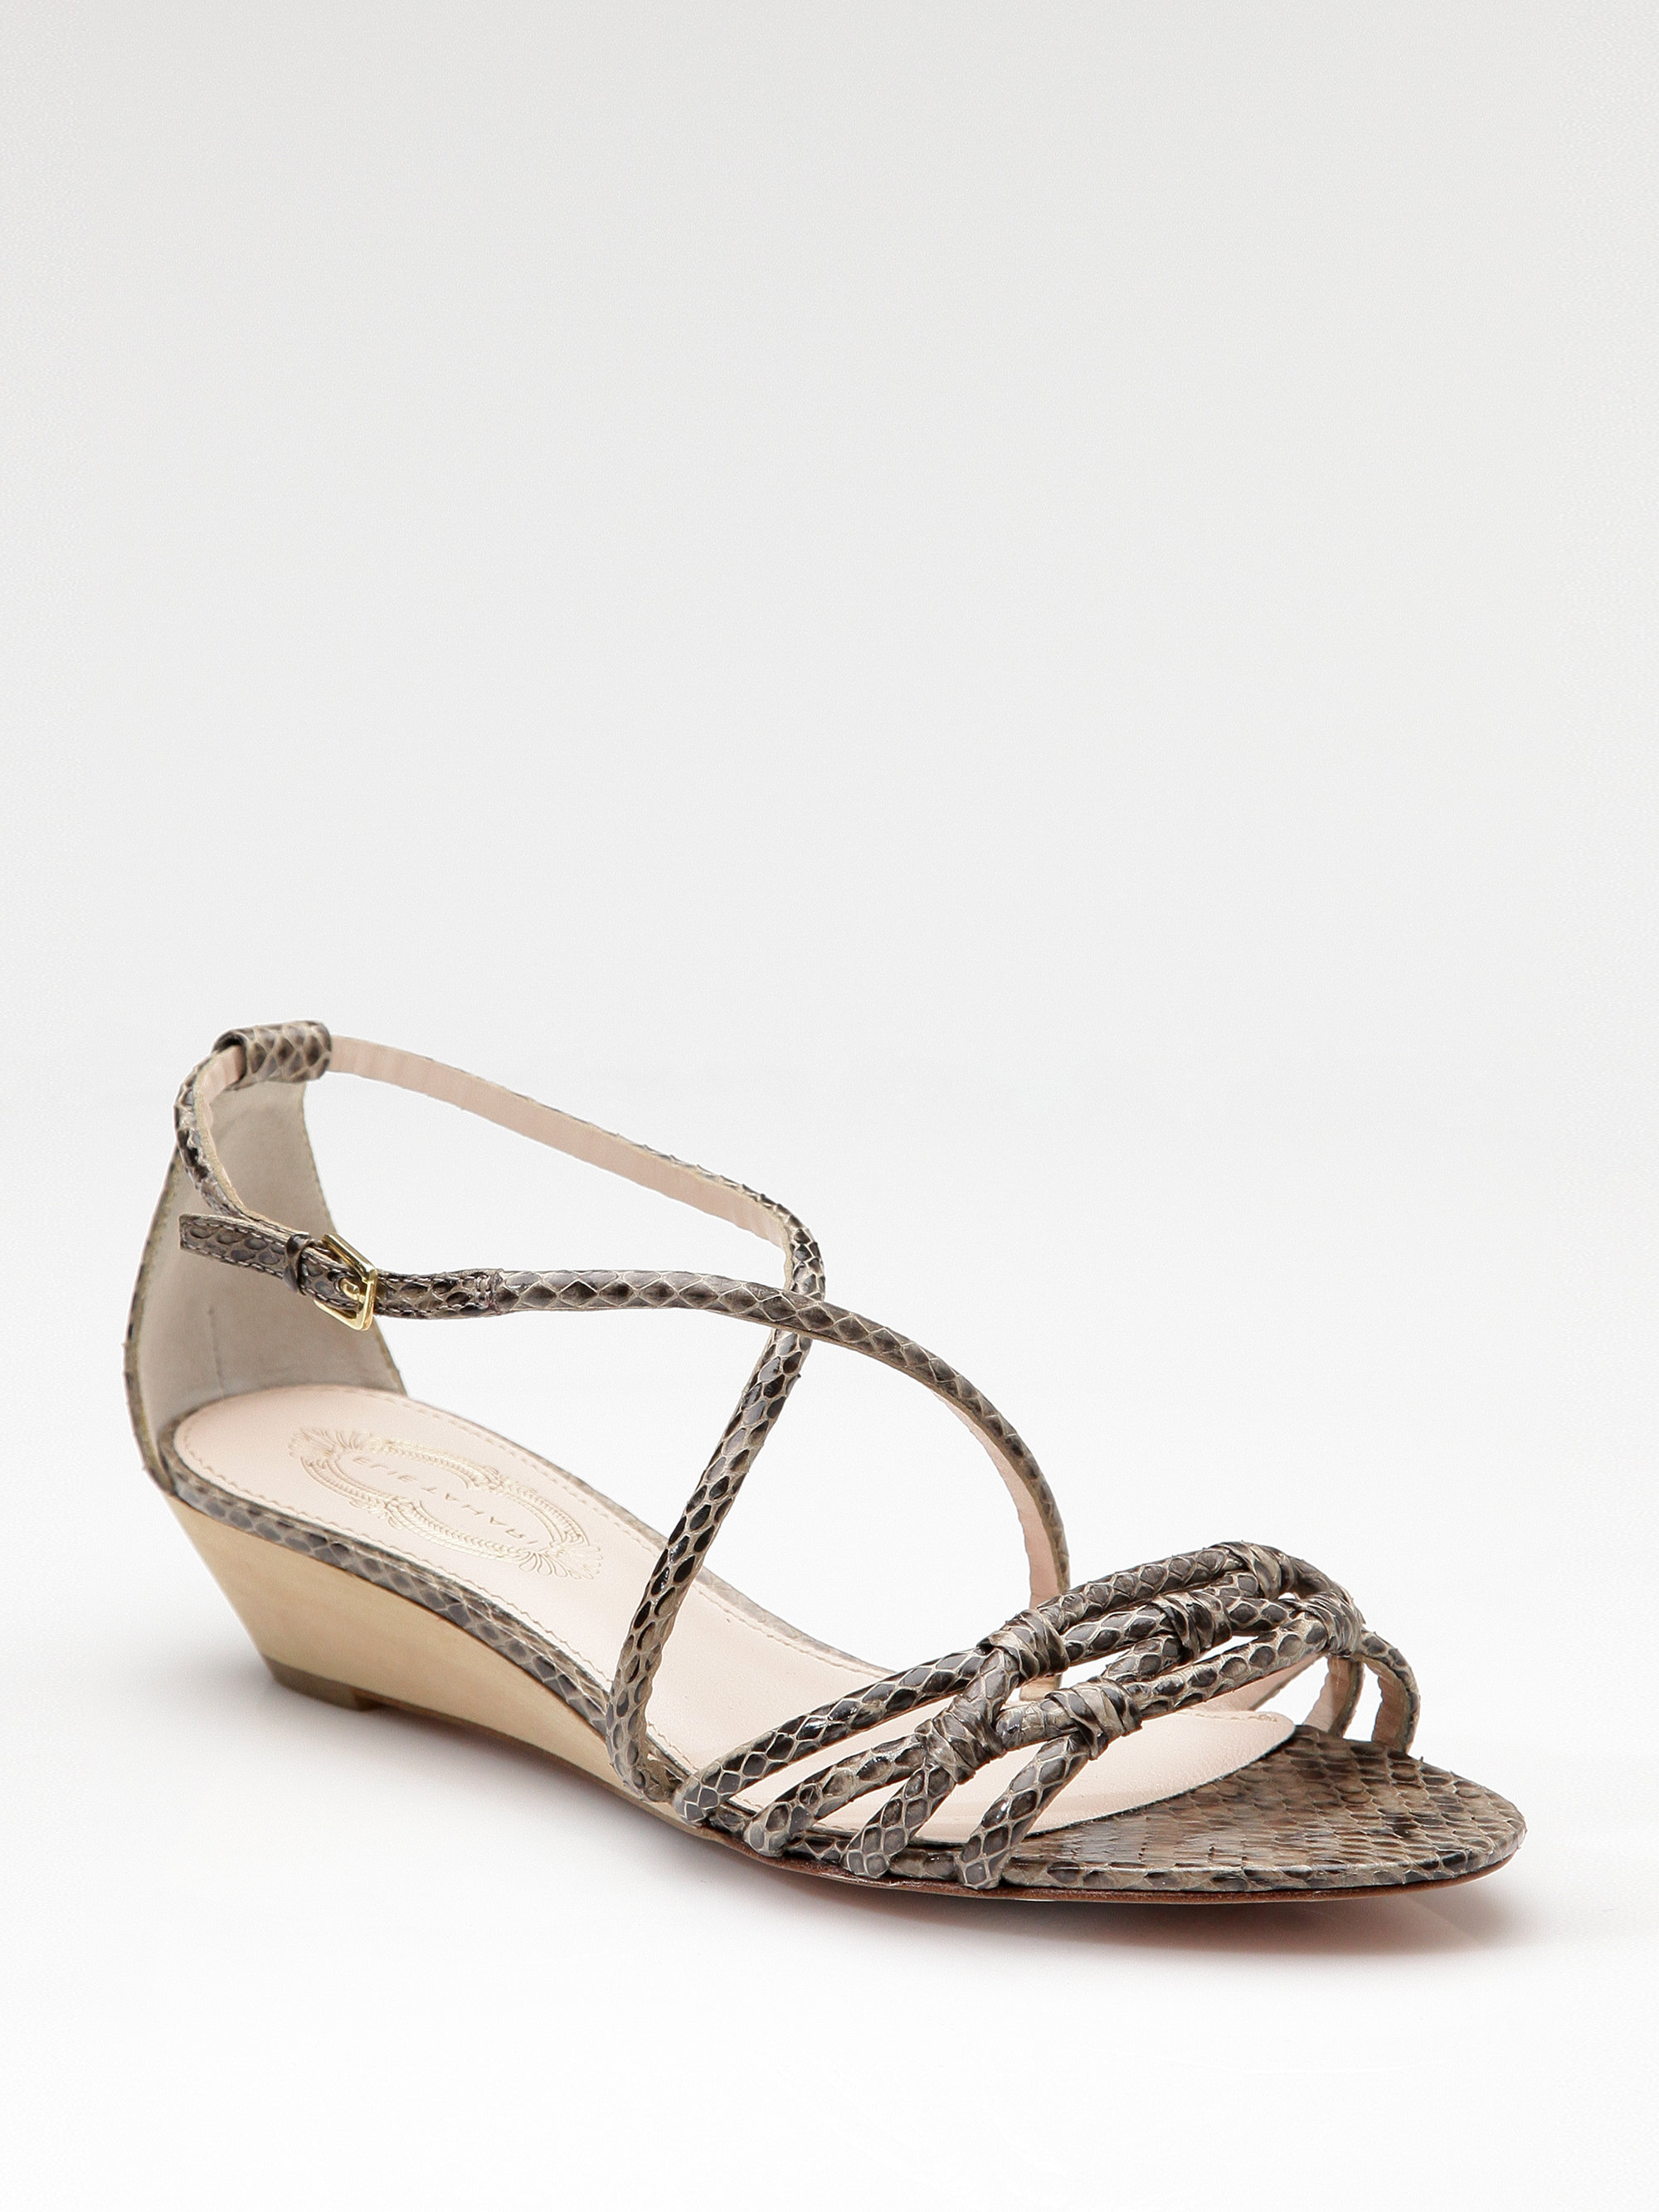 Elie Tahari Snakeprint Leather Strappy Wedge Sandals in Animal ...